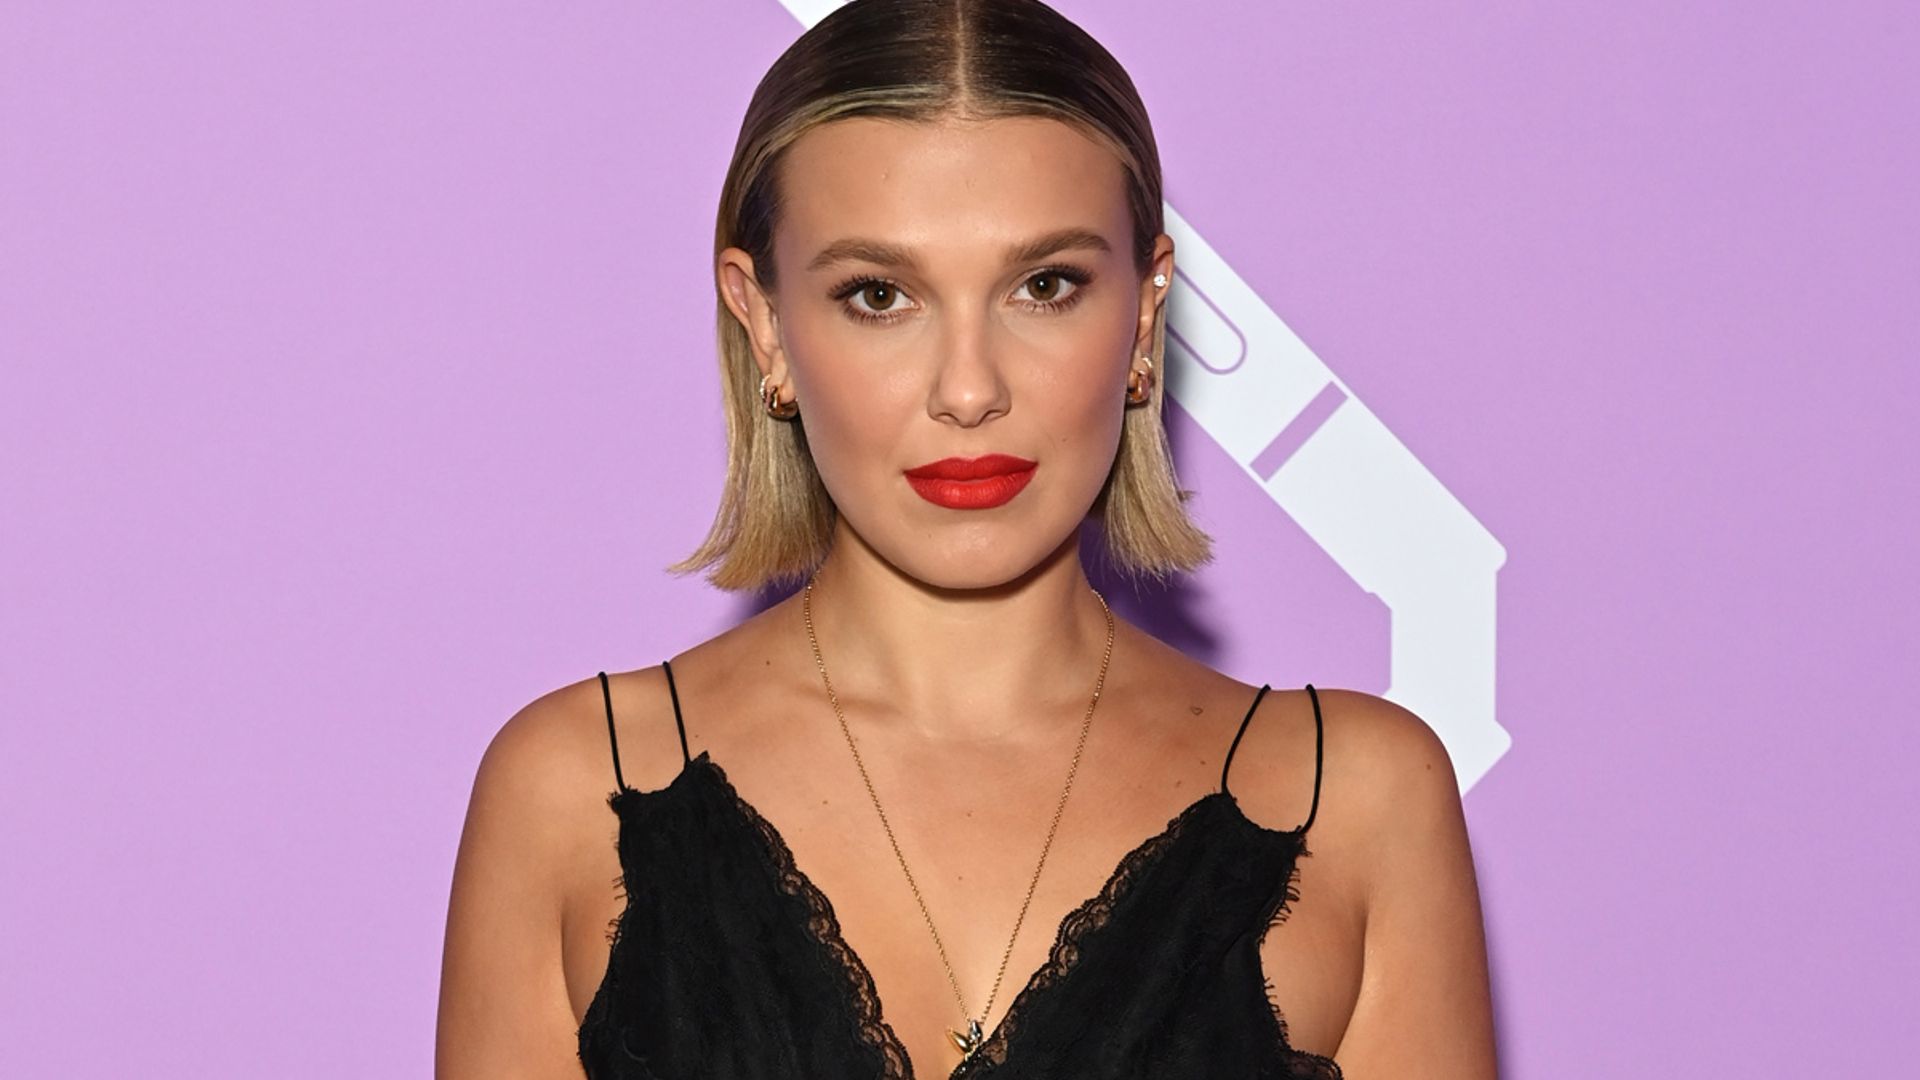 Millie Bobby Brown Bathing Suit Photos: Swimsuit Moments